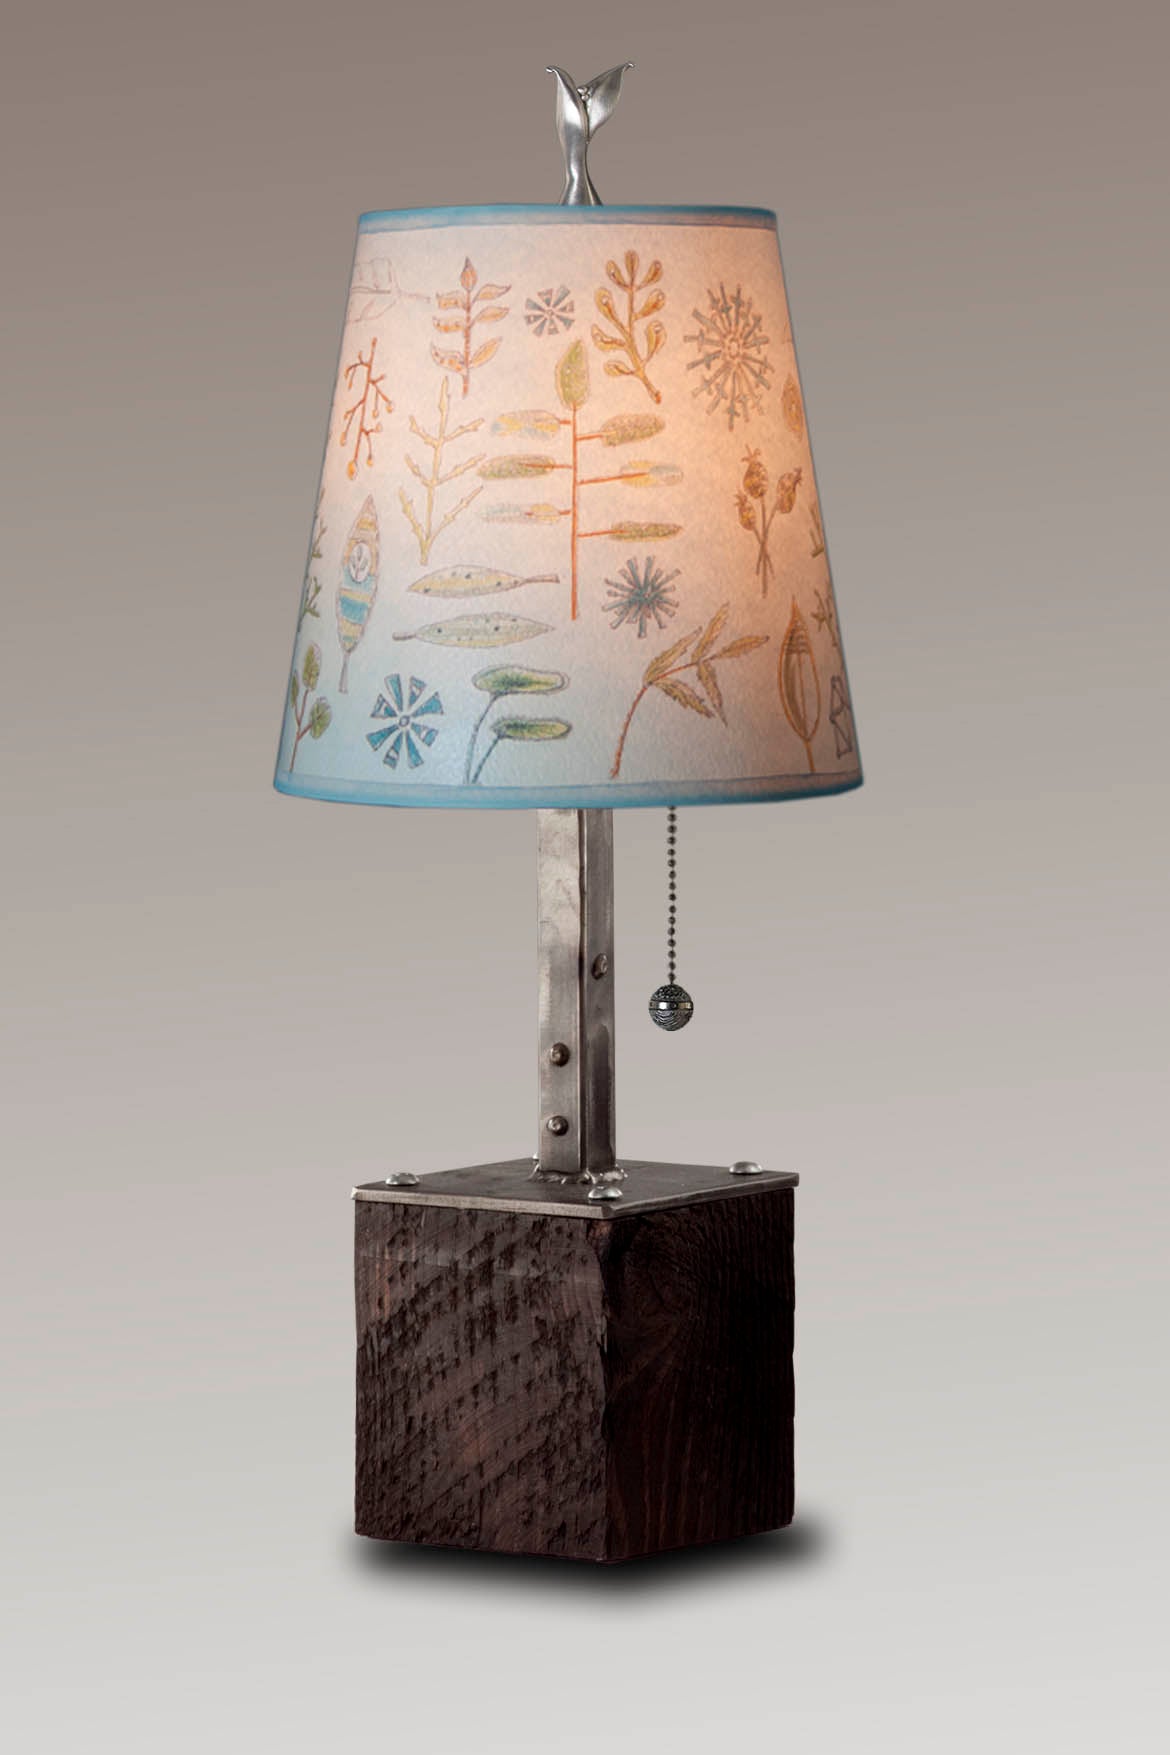 Janna Ugone & Co Table Lamp Steel Table Lamp on Reclaimed Wood with Small Drum Shade in Field Chart